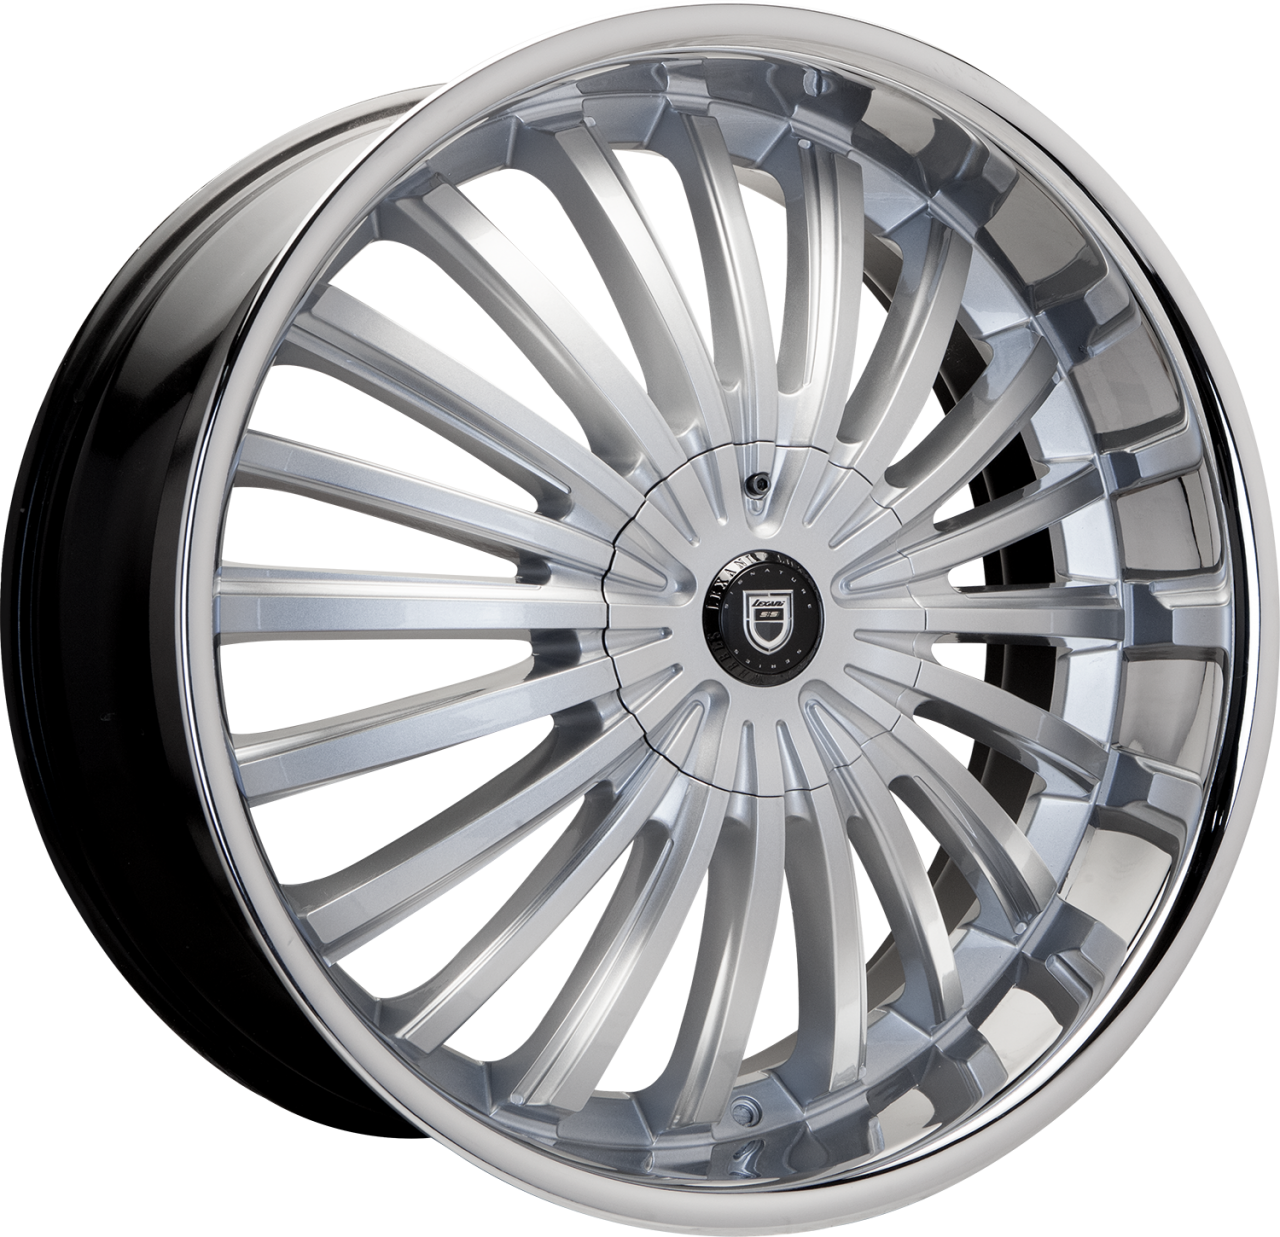 Artis Forged Royal wheel with Silver/Chrome finish